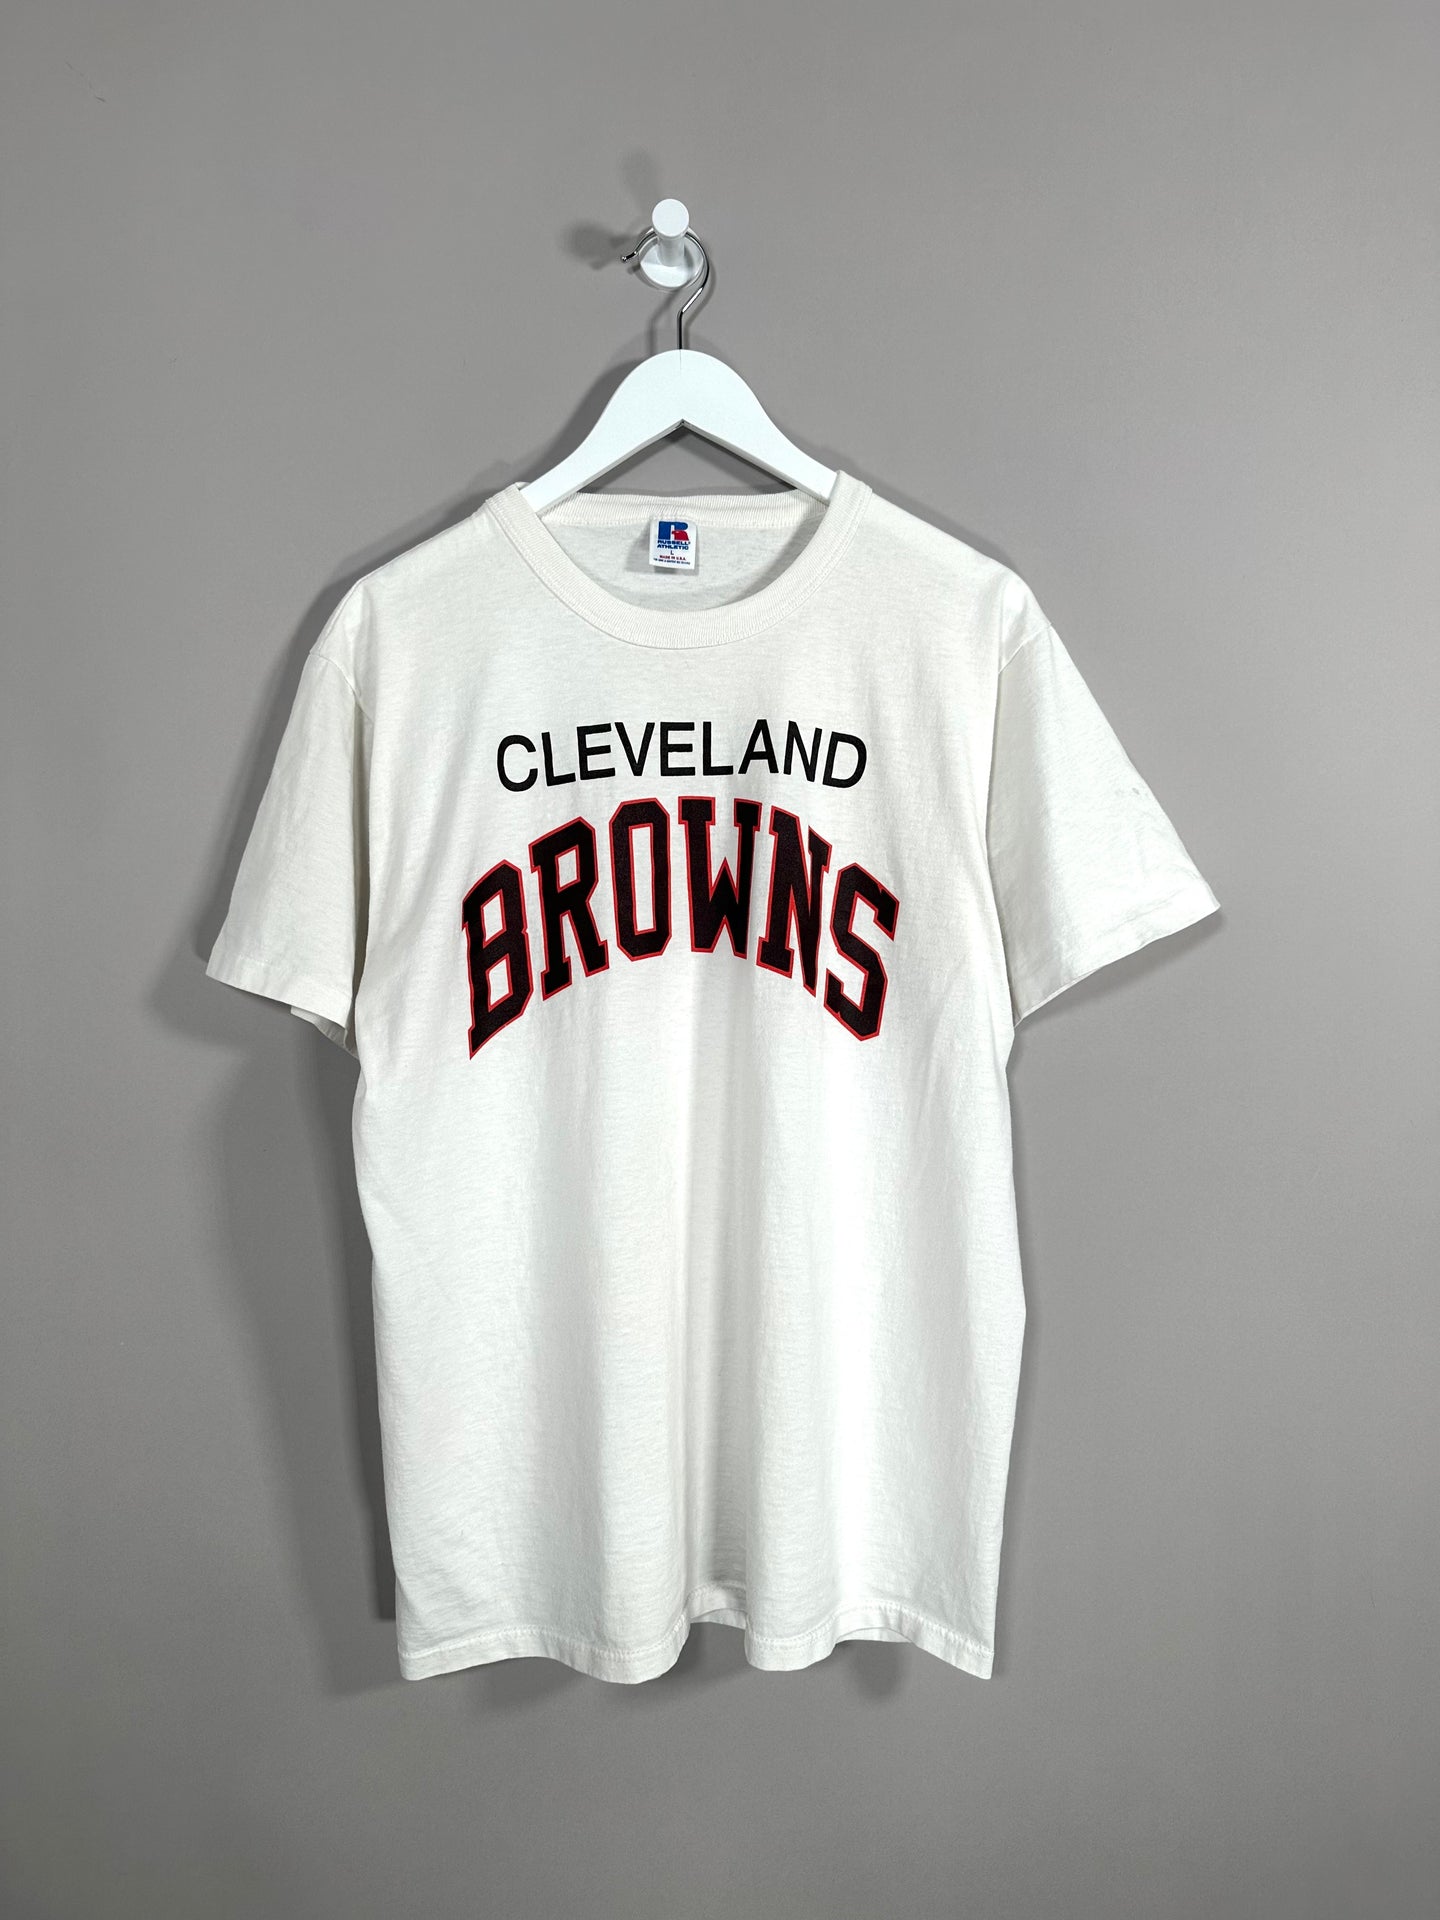 90s Cleveland Browns T Shirt - M (Tagged L)